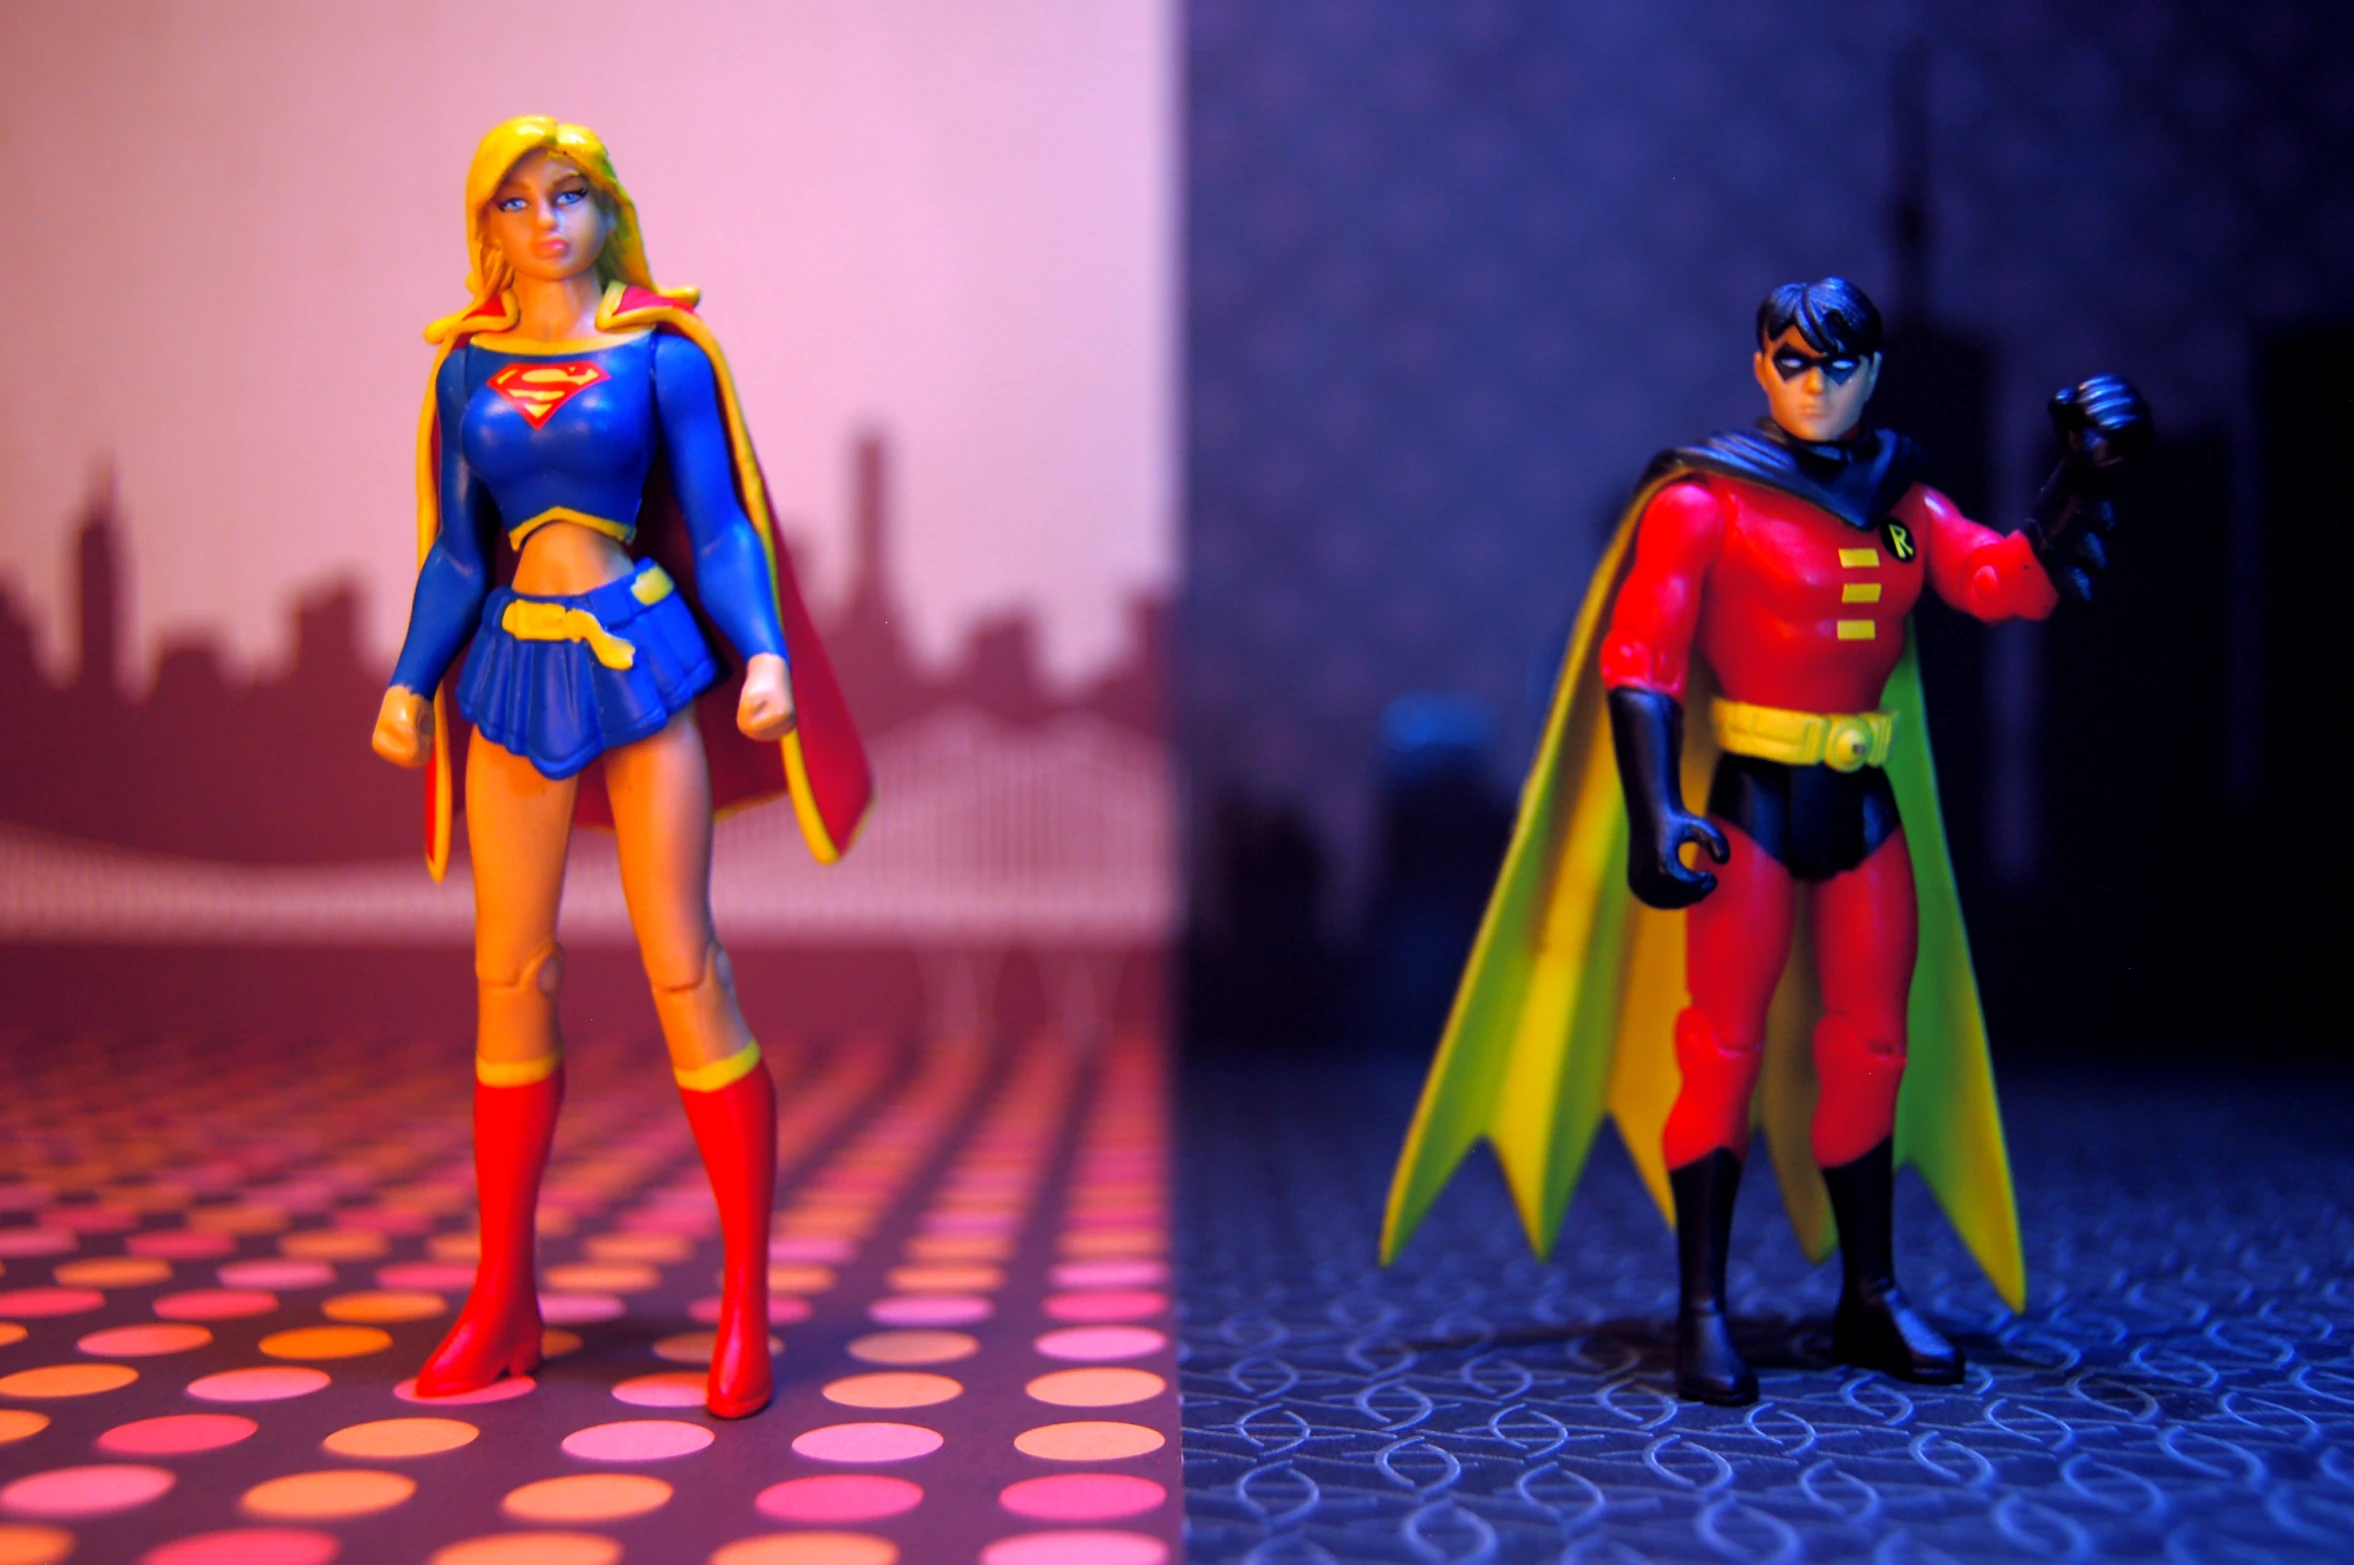 two action figures are seen in different poses